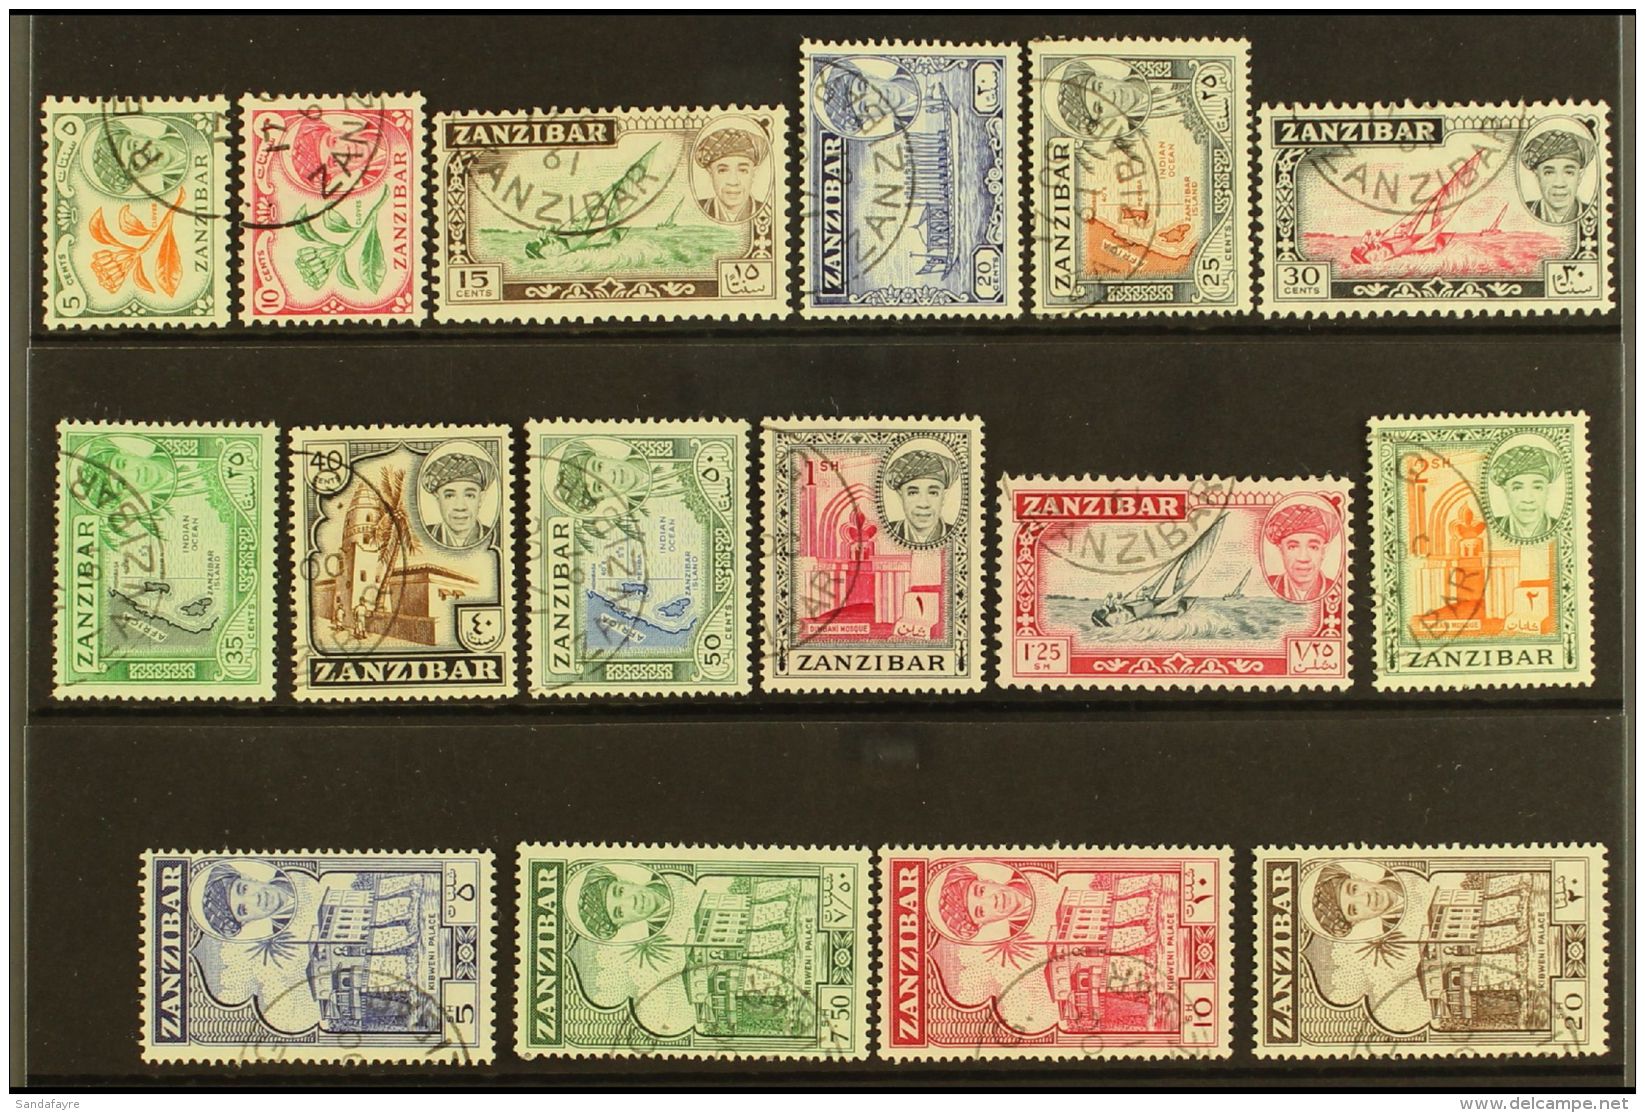 1961 Pictorials Complete Set, SG 373/88, Superb Cds Used, Very Fresh. (16 Stamps) For More Images, Please Visit... - Zanzibar (...-1963)